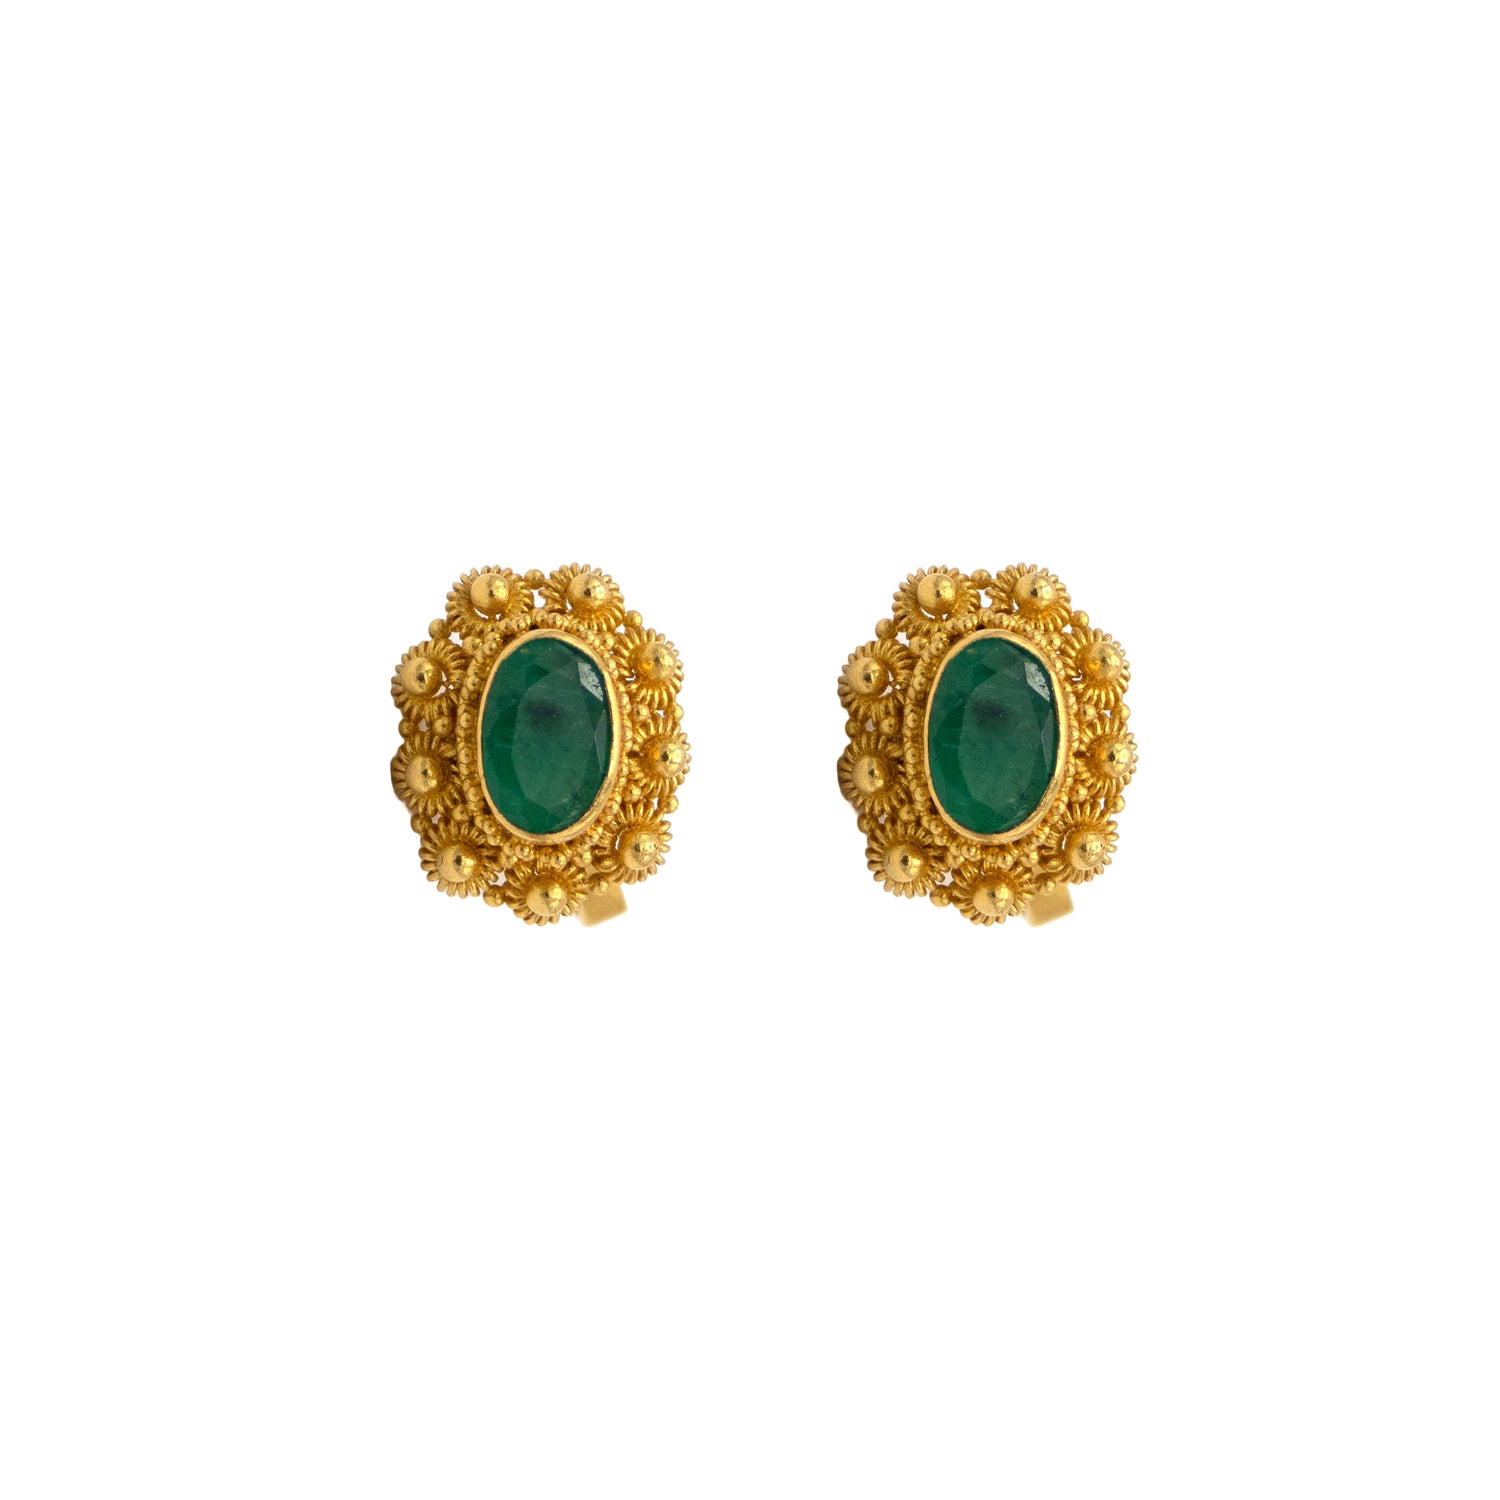 22K Gold and Emerald Earrings